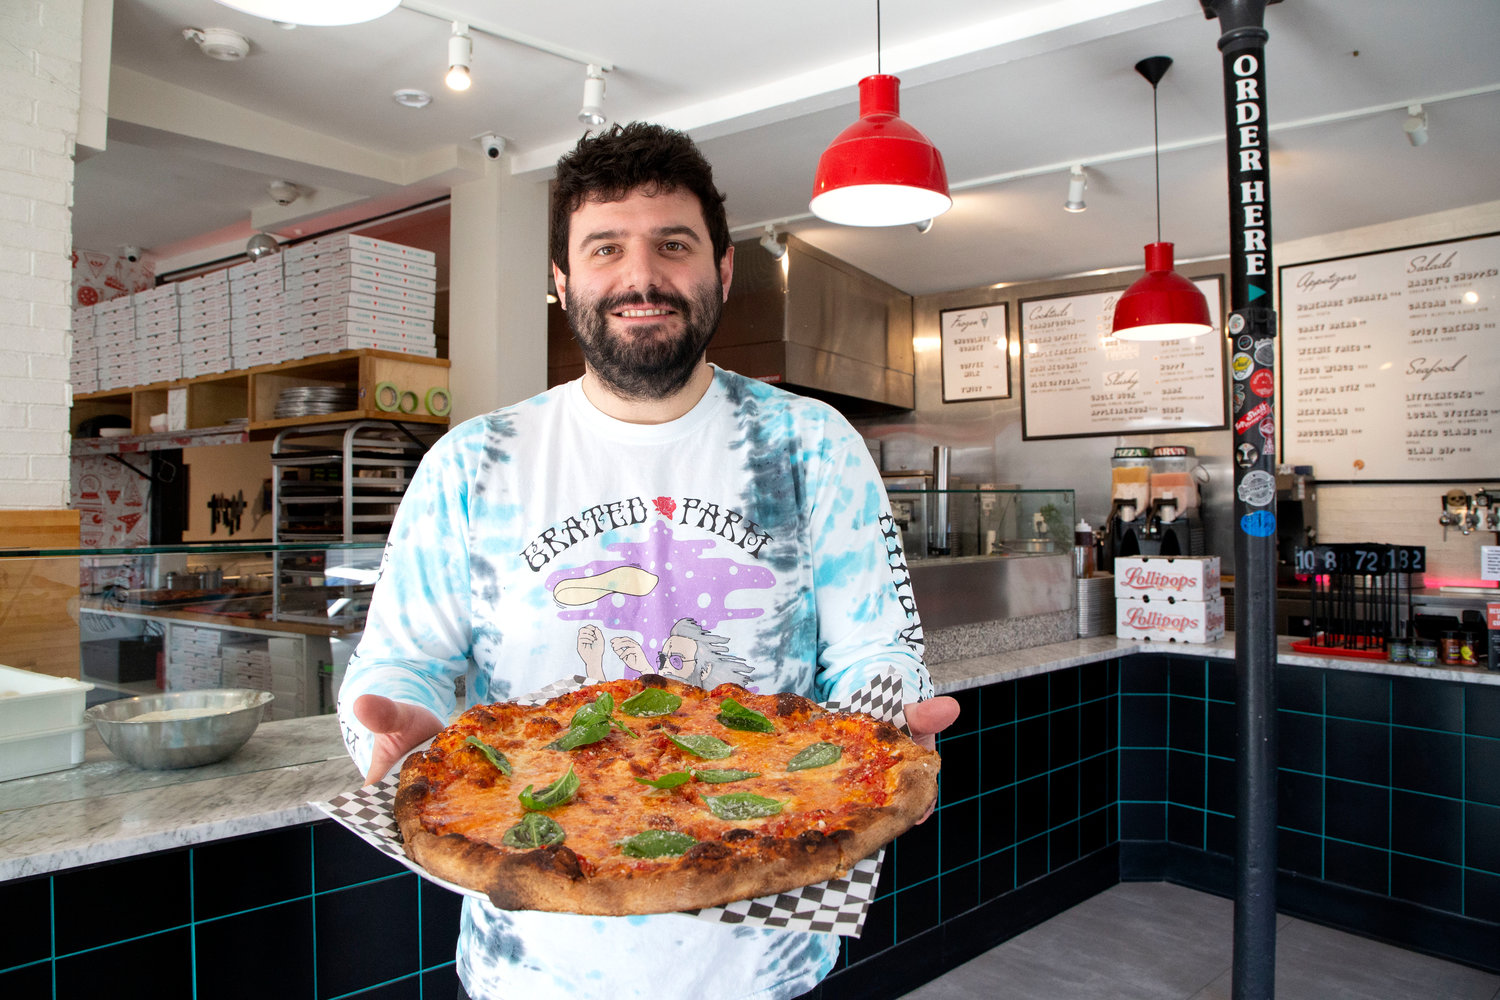 Robert Andreozzi holds up a finished pie inside Pizza Marvin, which specializes in unique pizza and cocktail offerings.